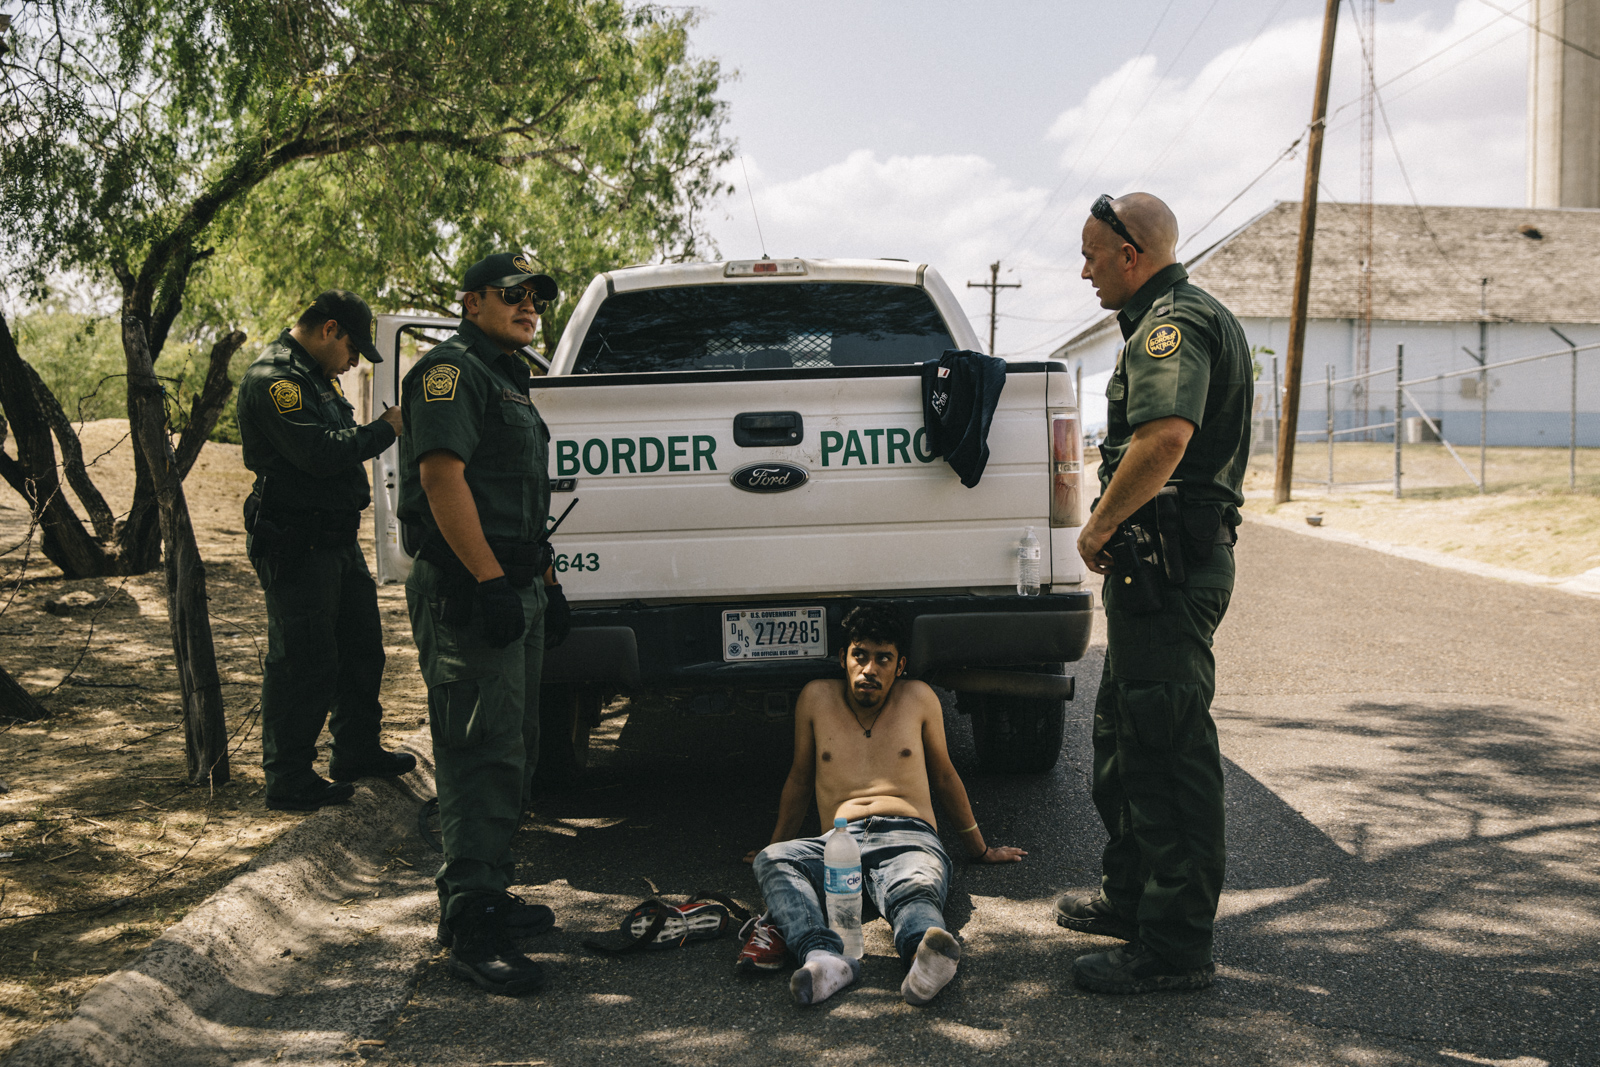 U.S. Customs and Border Protection in Southeast Texas